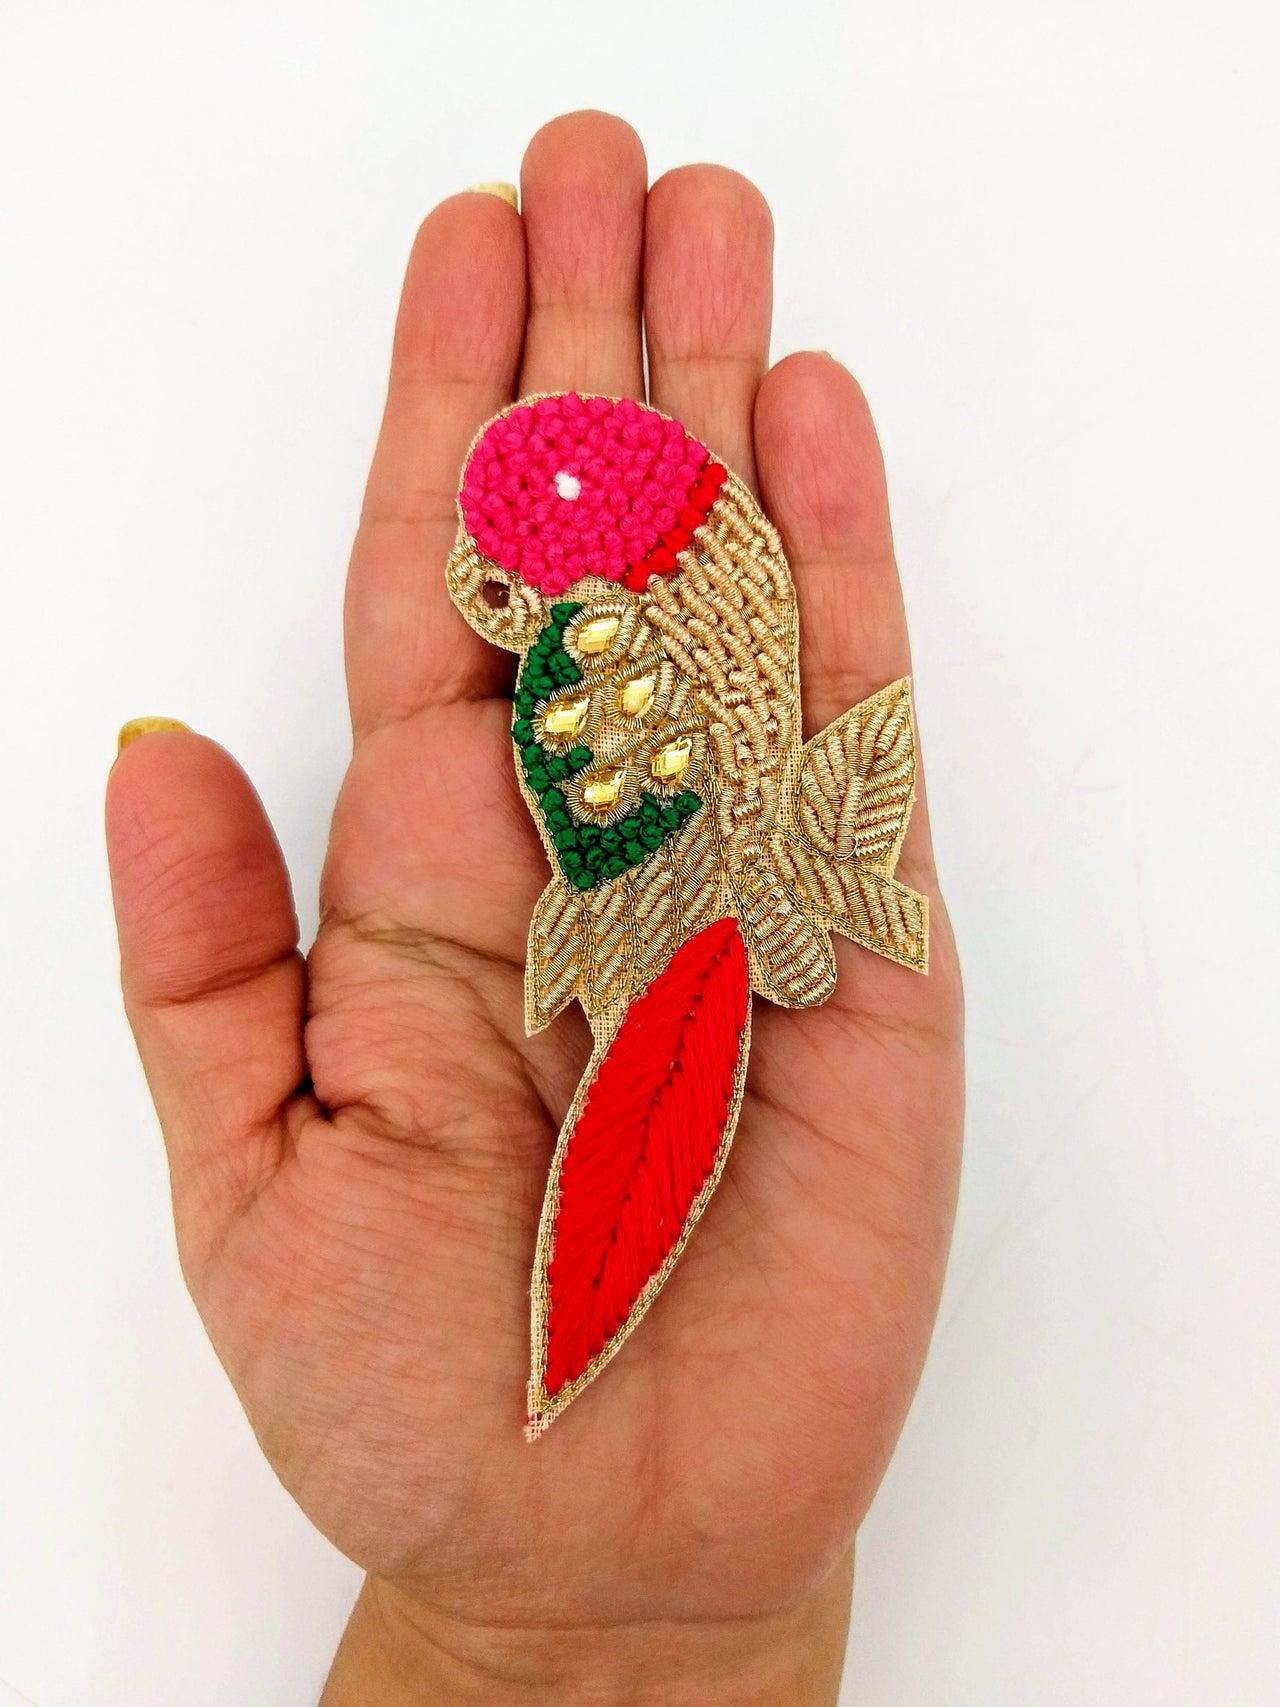 Hand Embroidered Bird Applique With Pink and Red Embroidery With Antique Gold Zardozi Work, Parrot Applique, Knot Embroidered Applique